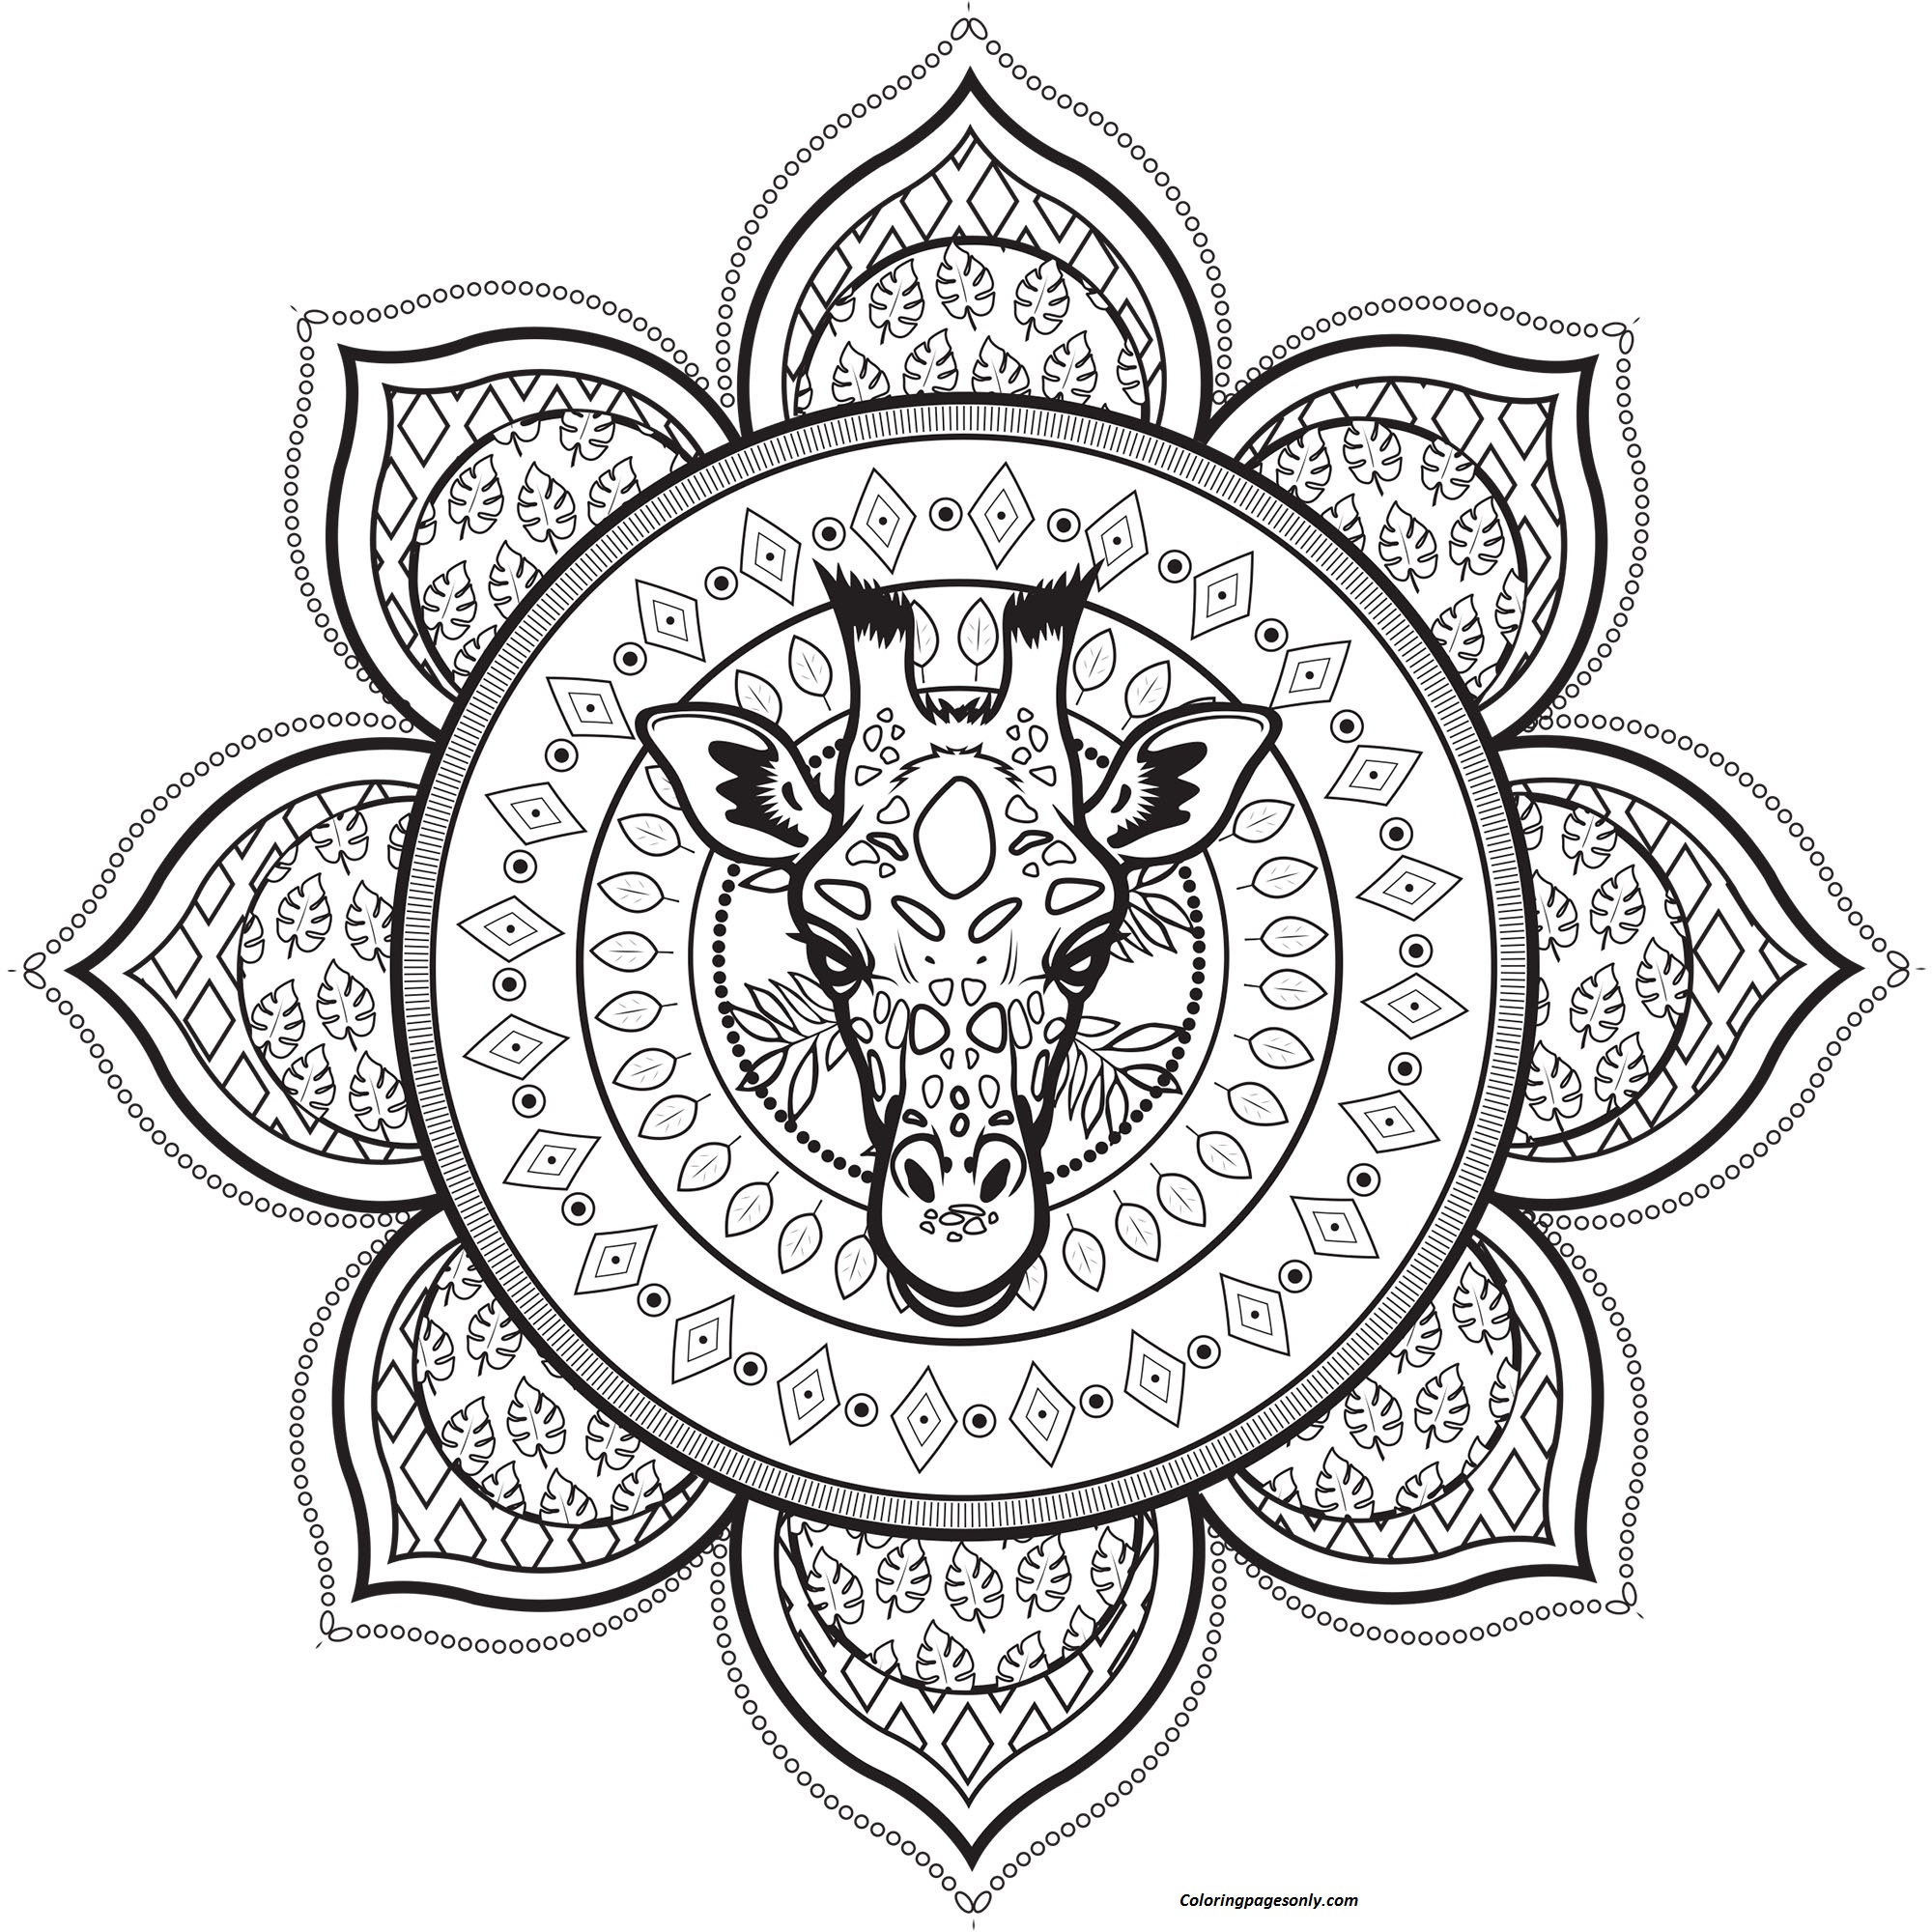 Download Mandala With A Giraffe Coloring Pages Mandala Coloring Pages Coloring Pages For Kids And Adults